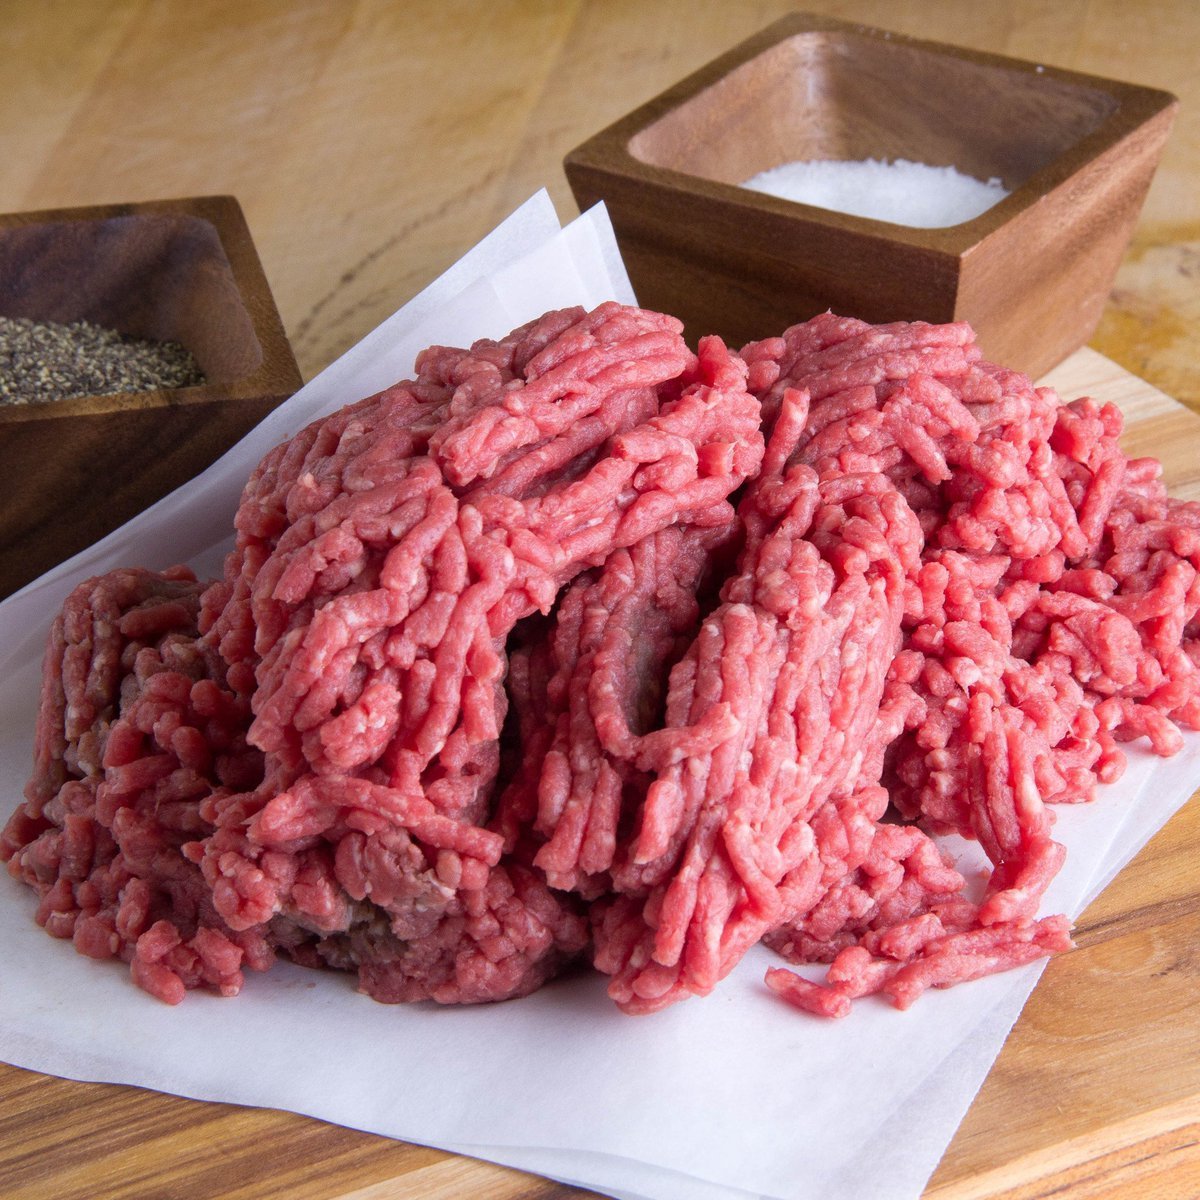 ADD 5 LBS OF PREMIUM GROUND BEEF TO YOUR ORDER - Heartstone Farm